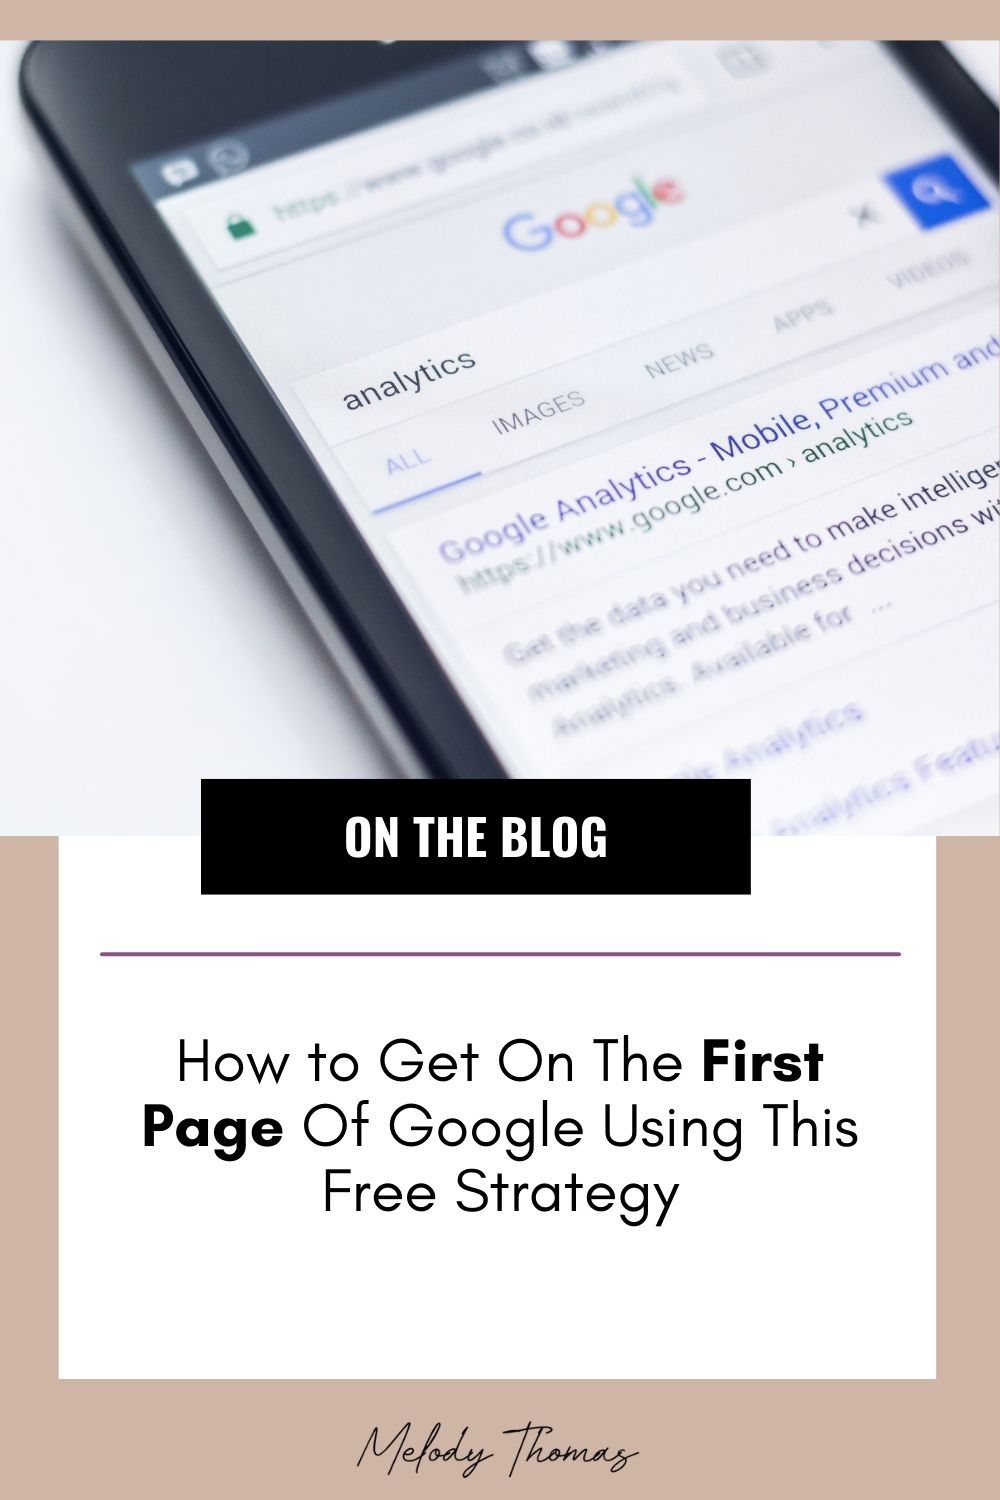 How to Get On The First Page Of Google Using This Free Strategy